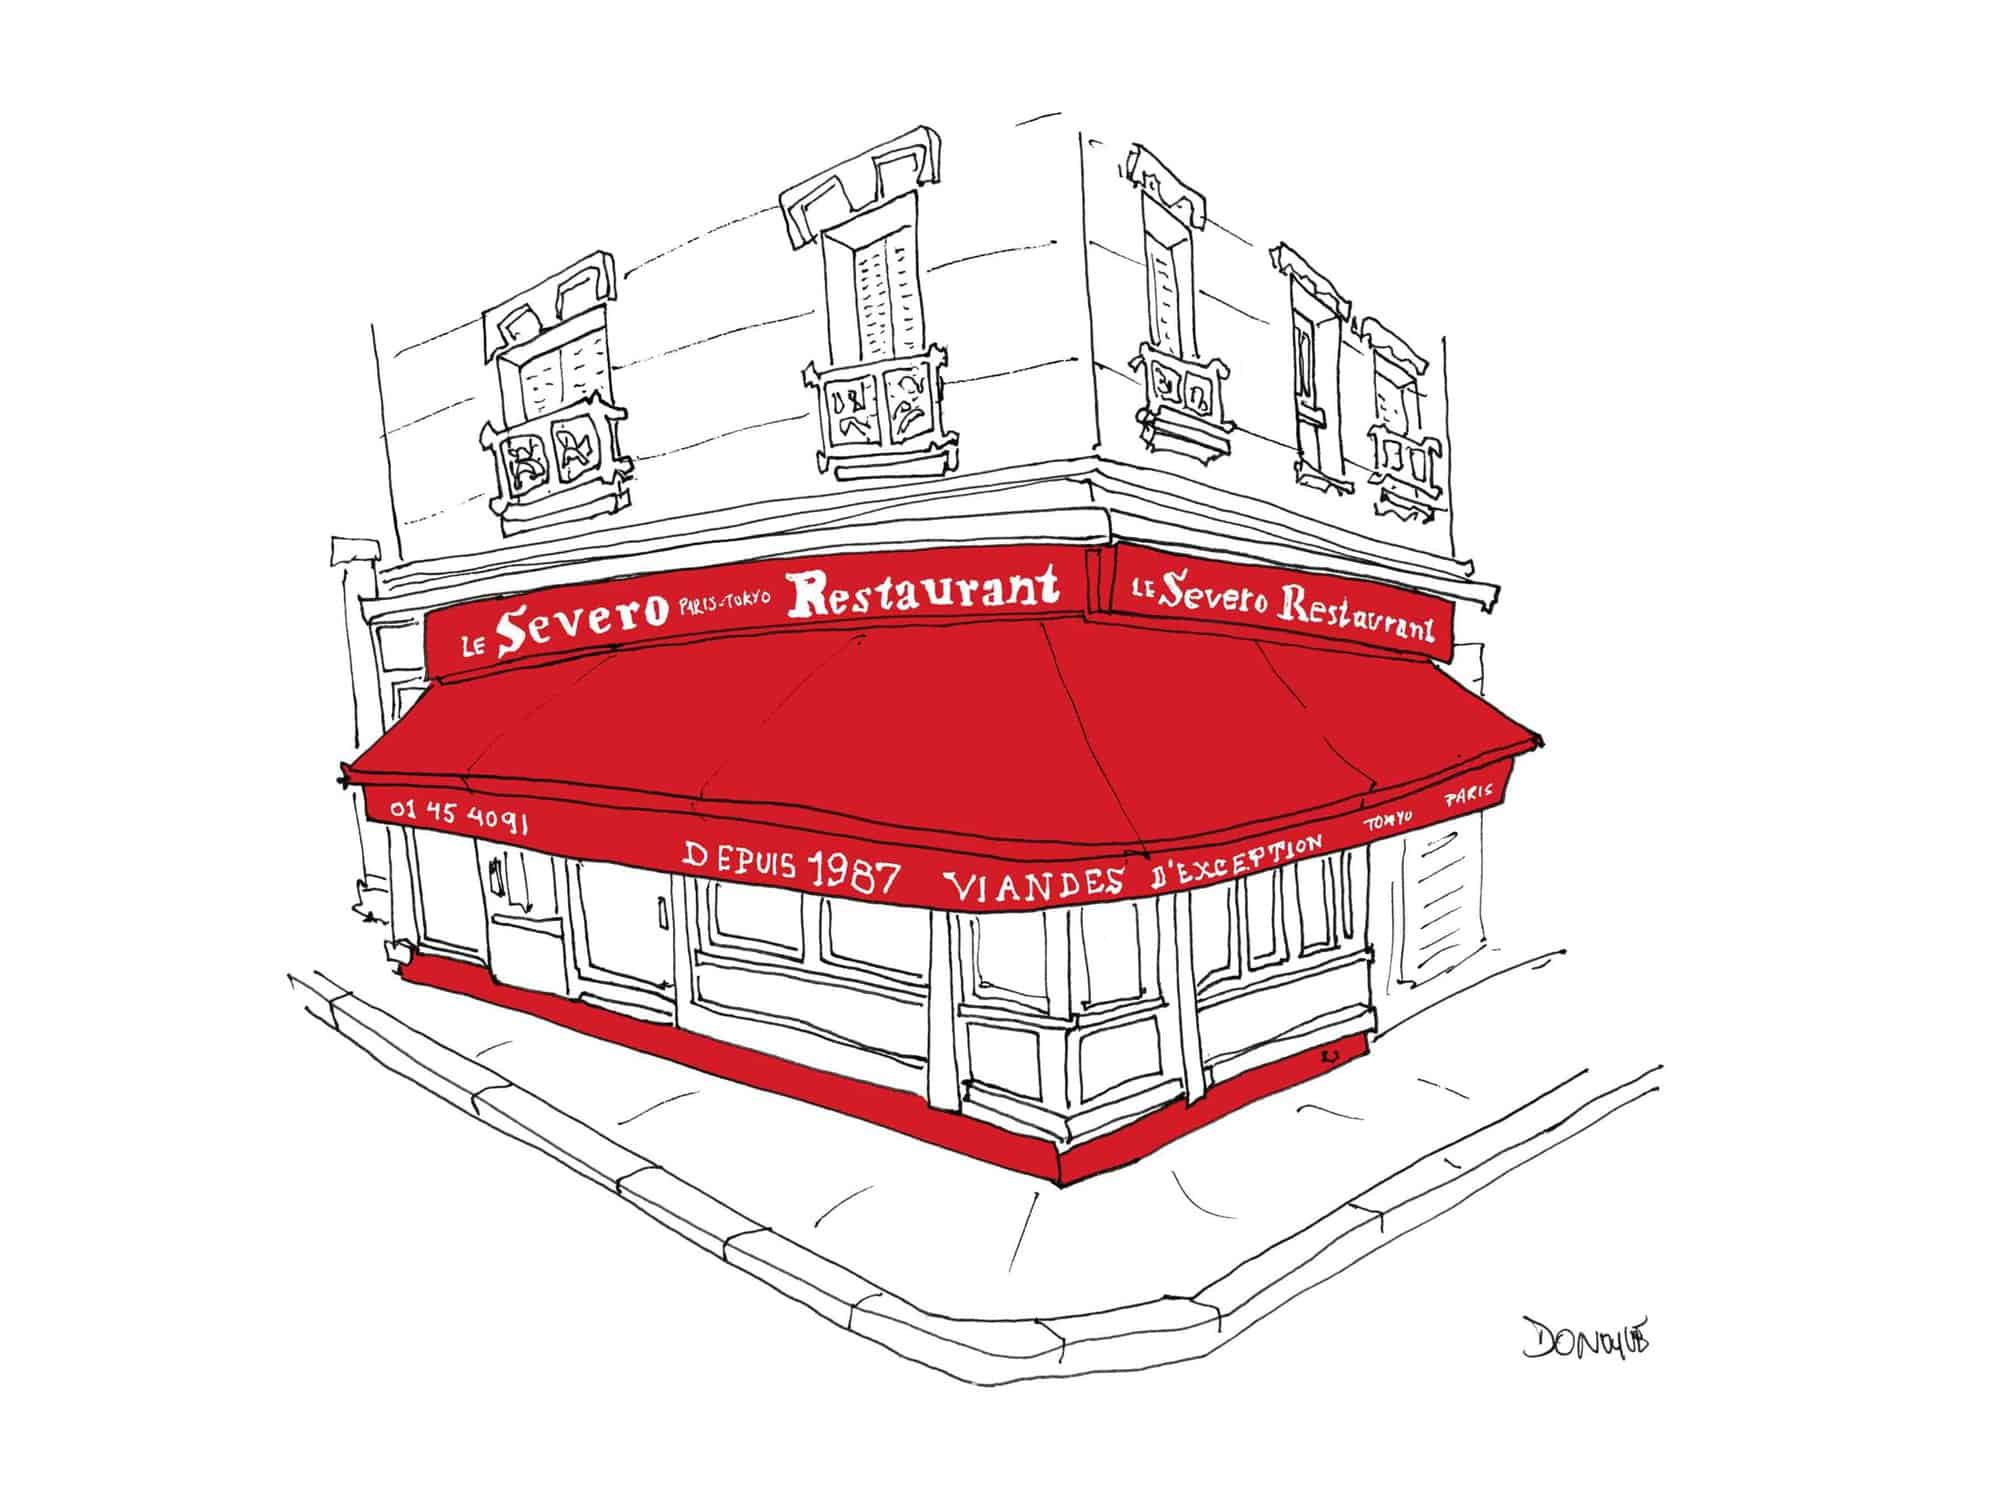 John Donohue's sketch of Parisian restaurant "Le Severo" in black, white, and red.